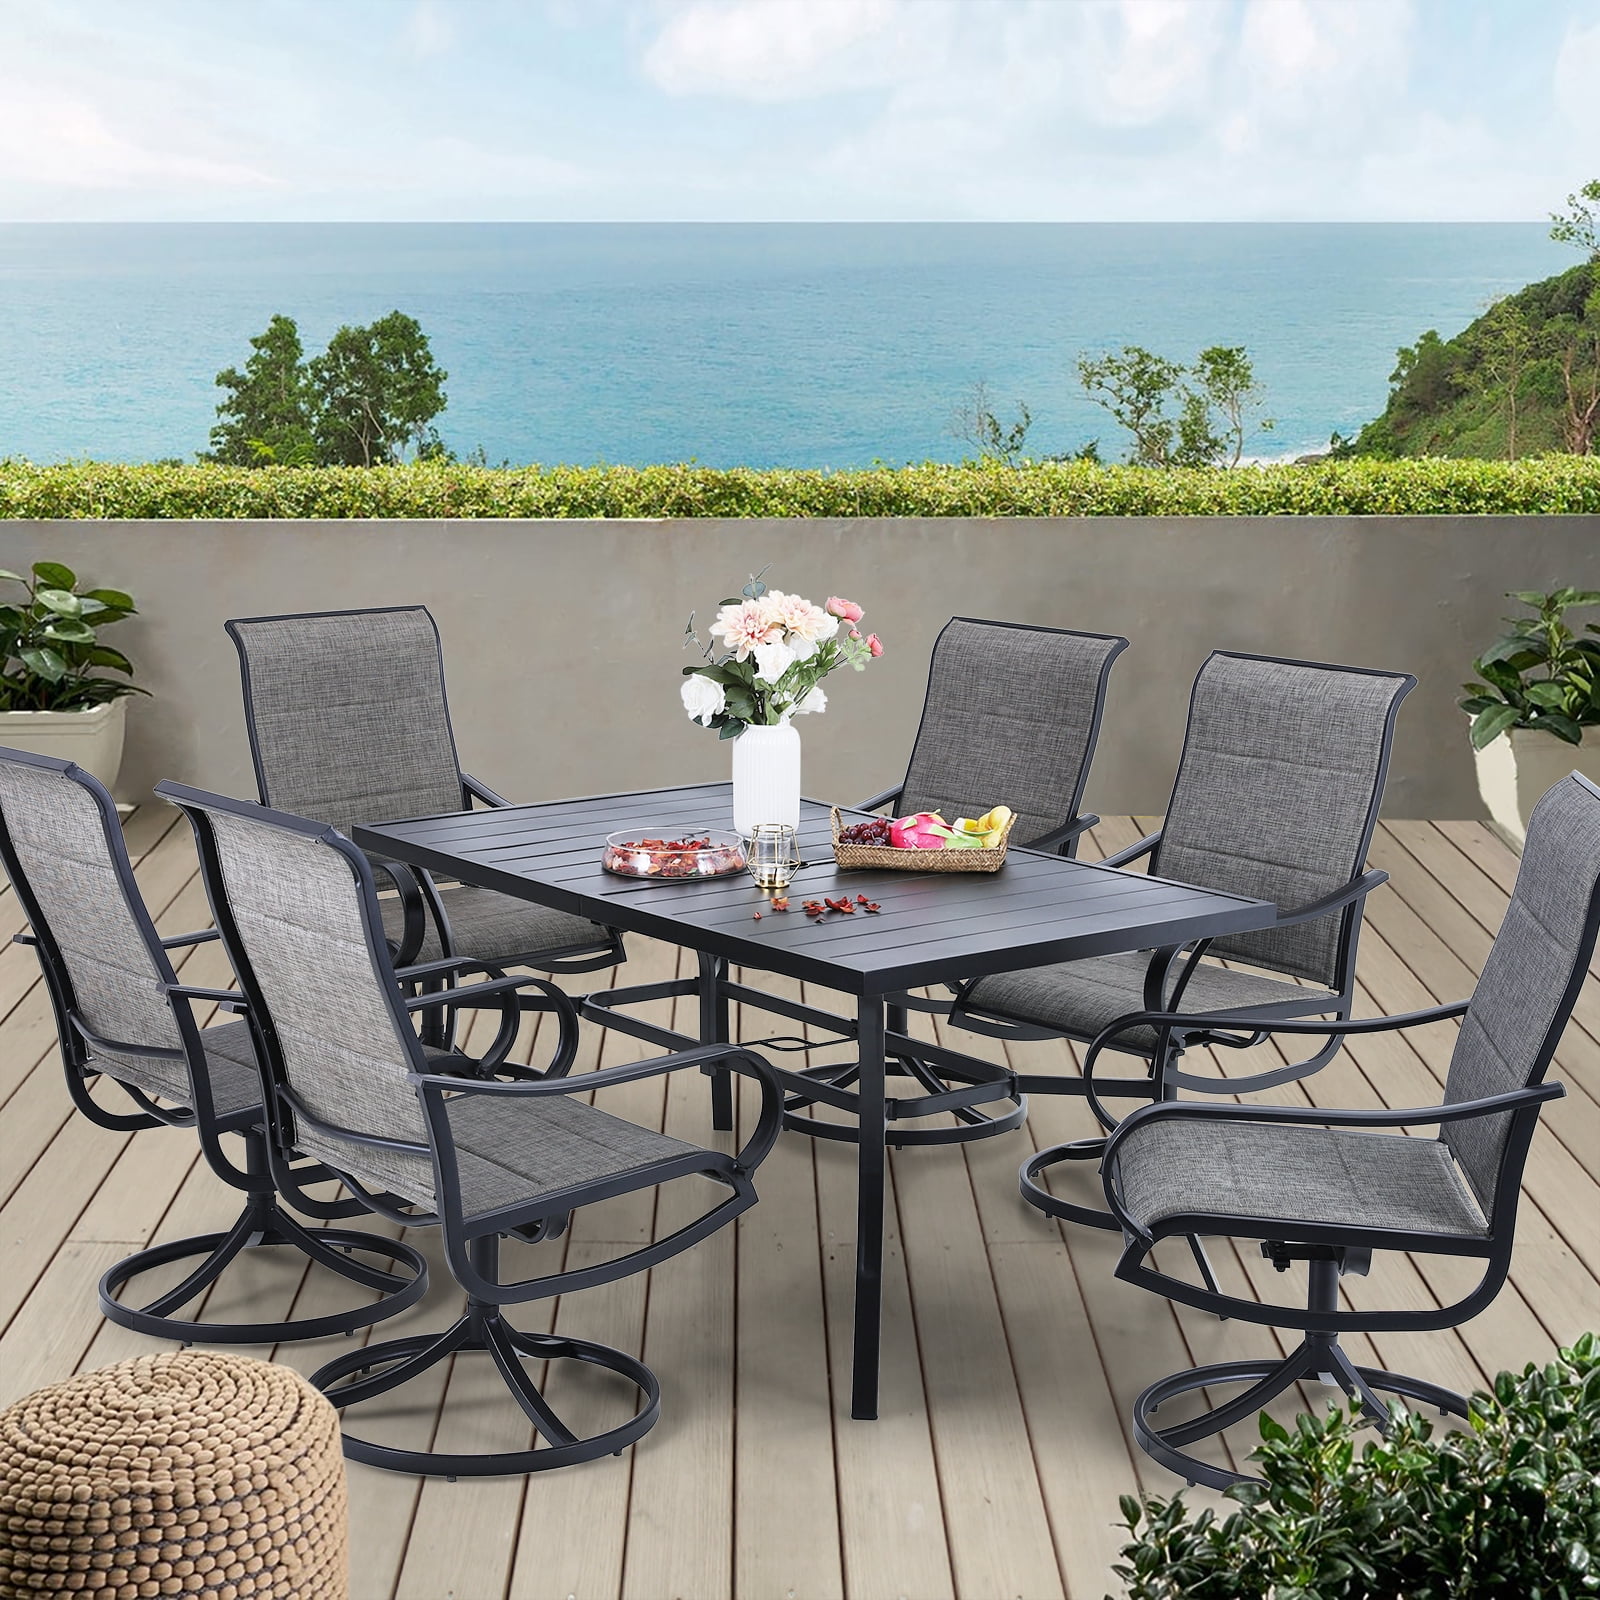 6 x Swivel Chairs with 1 Rectangular Umbrella Table for Outdoor Lawn Garden Black MF Dining Set 7 Pieces Metal Patio Furniture Set 